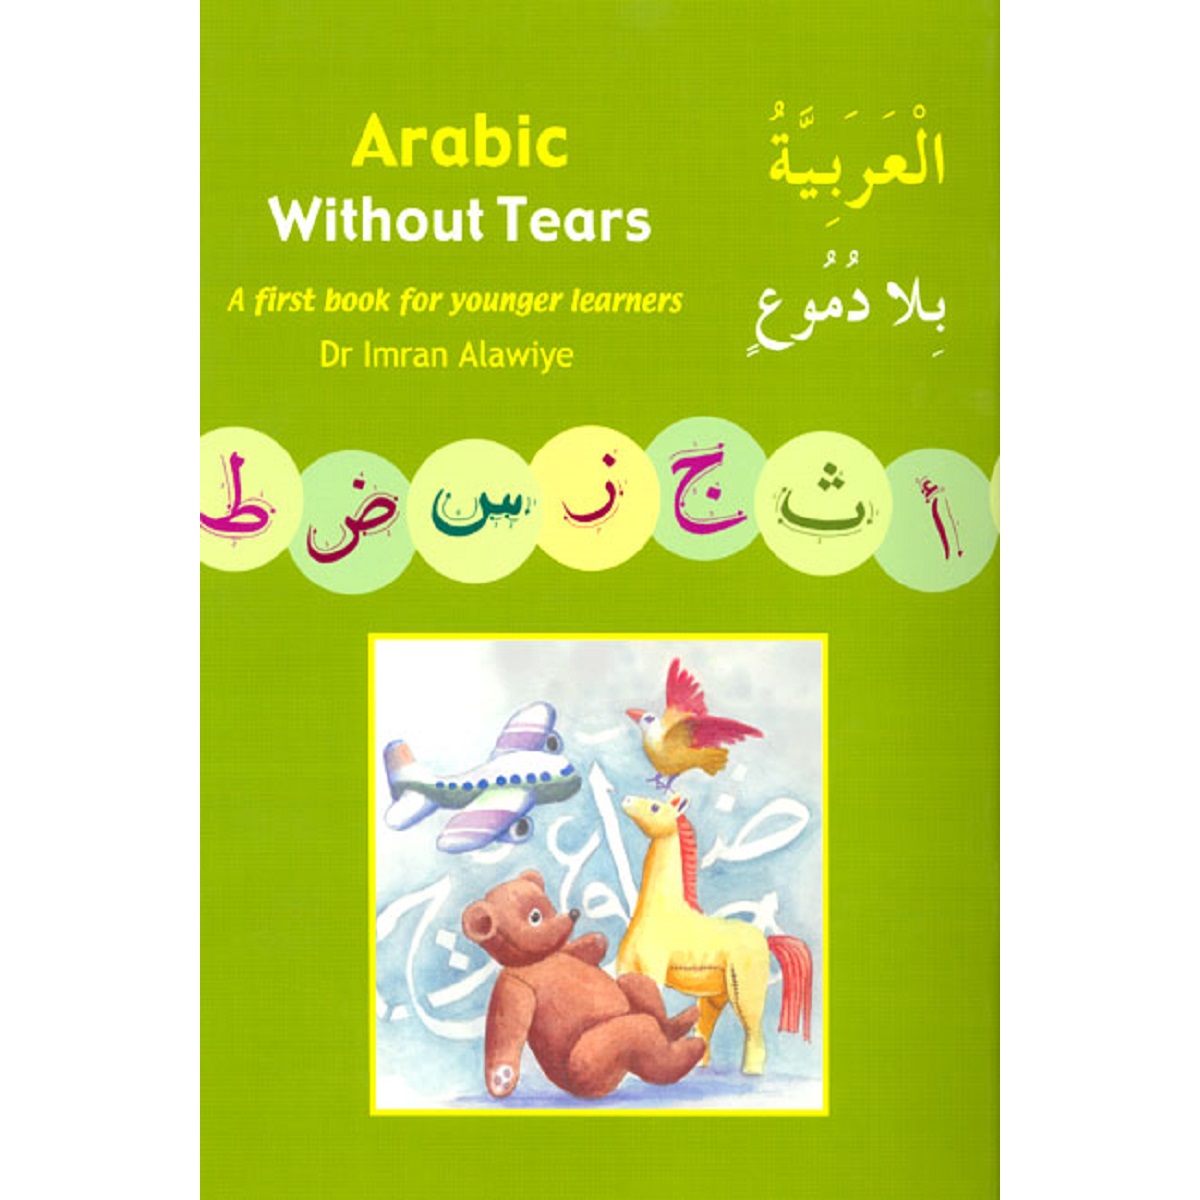 https://www.tarbiyahbooksplus.com/shop/islamic-books-and-products-for-children/arabic-without-tears-book-1-a-first-book-for-younger-learners-paperback-by-imran-hamza-alawiye/